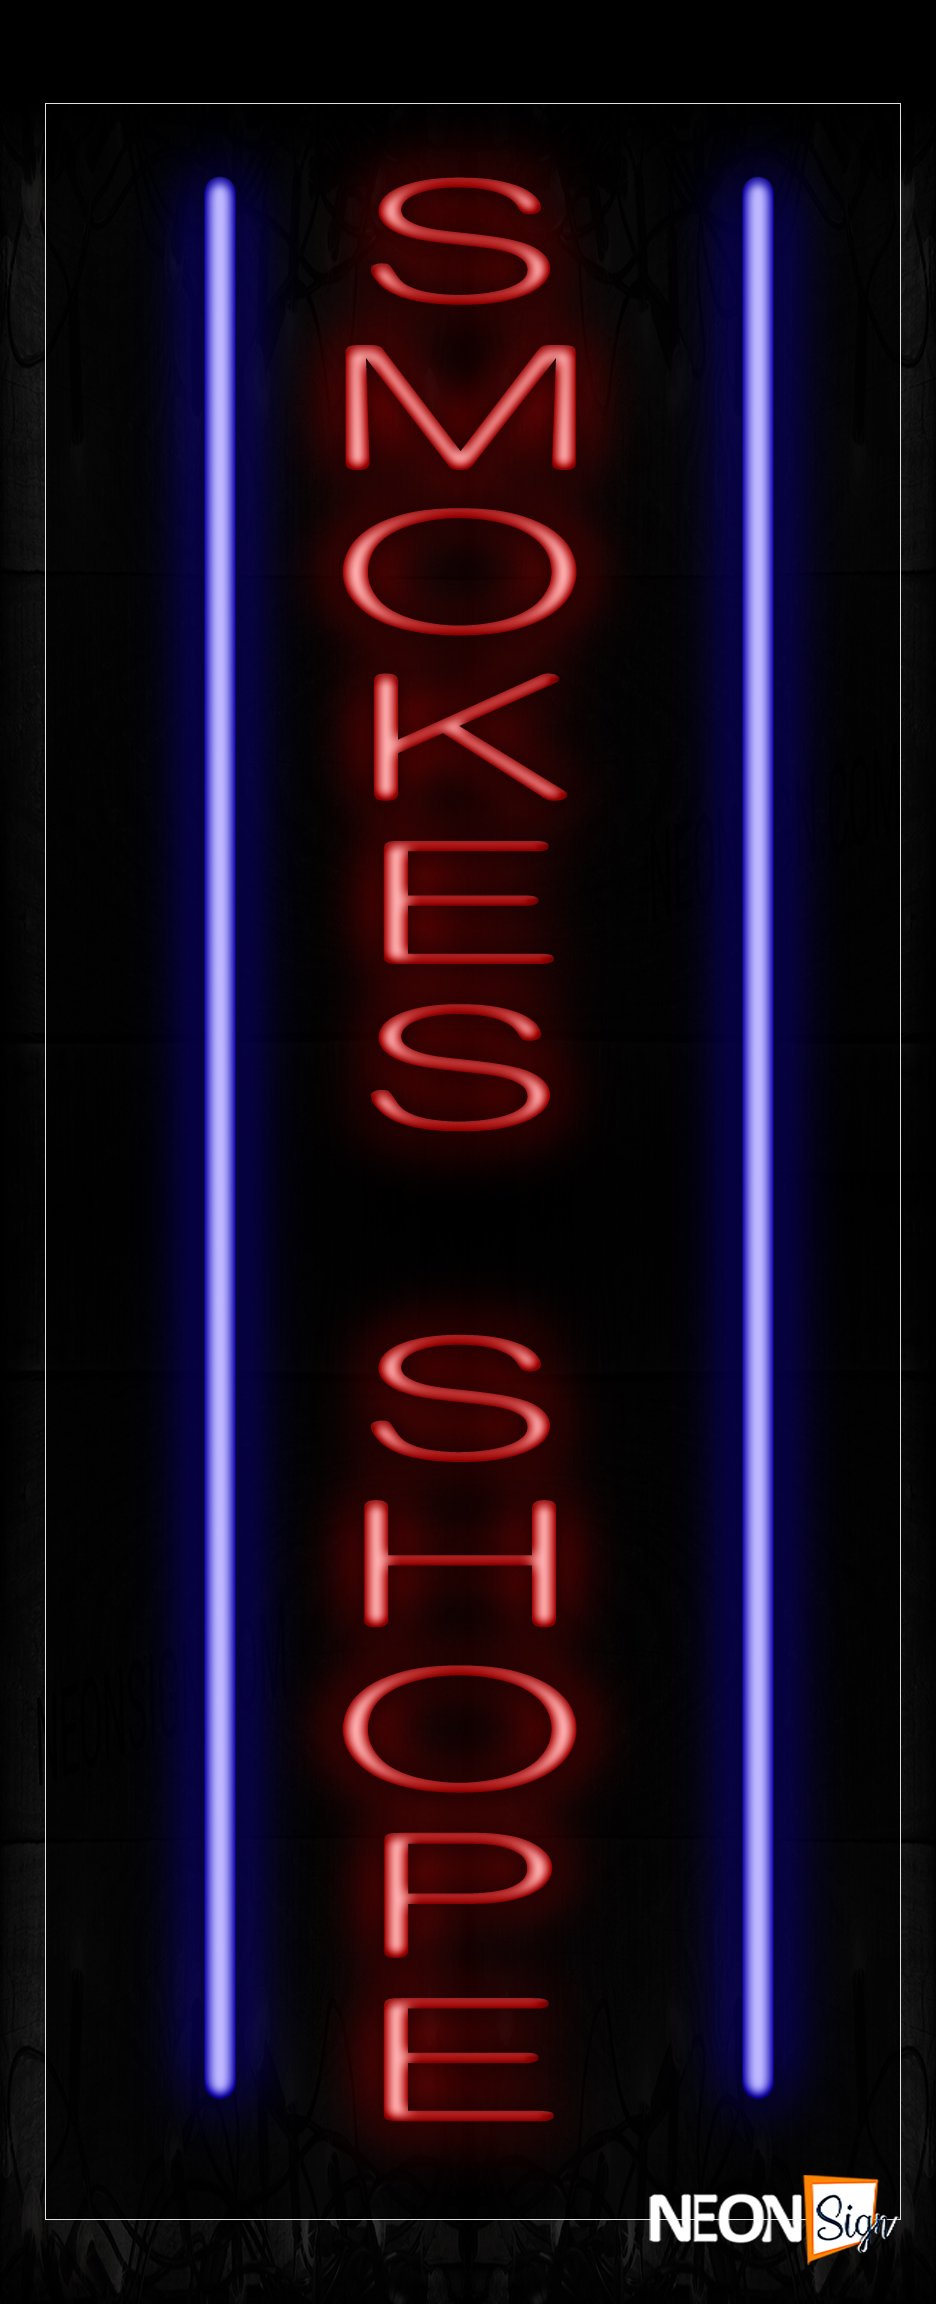 Image of 11623 Smoke Shop In Red With Blue Border (Vertical) Neon Signs_13x32 Black Backing